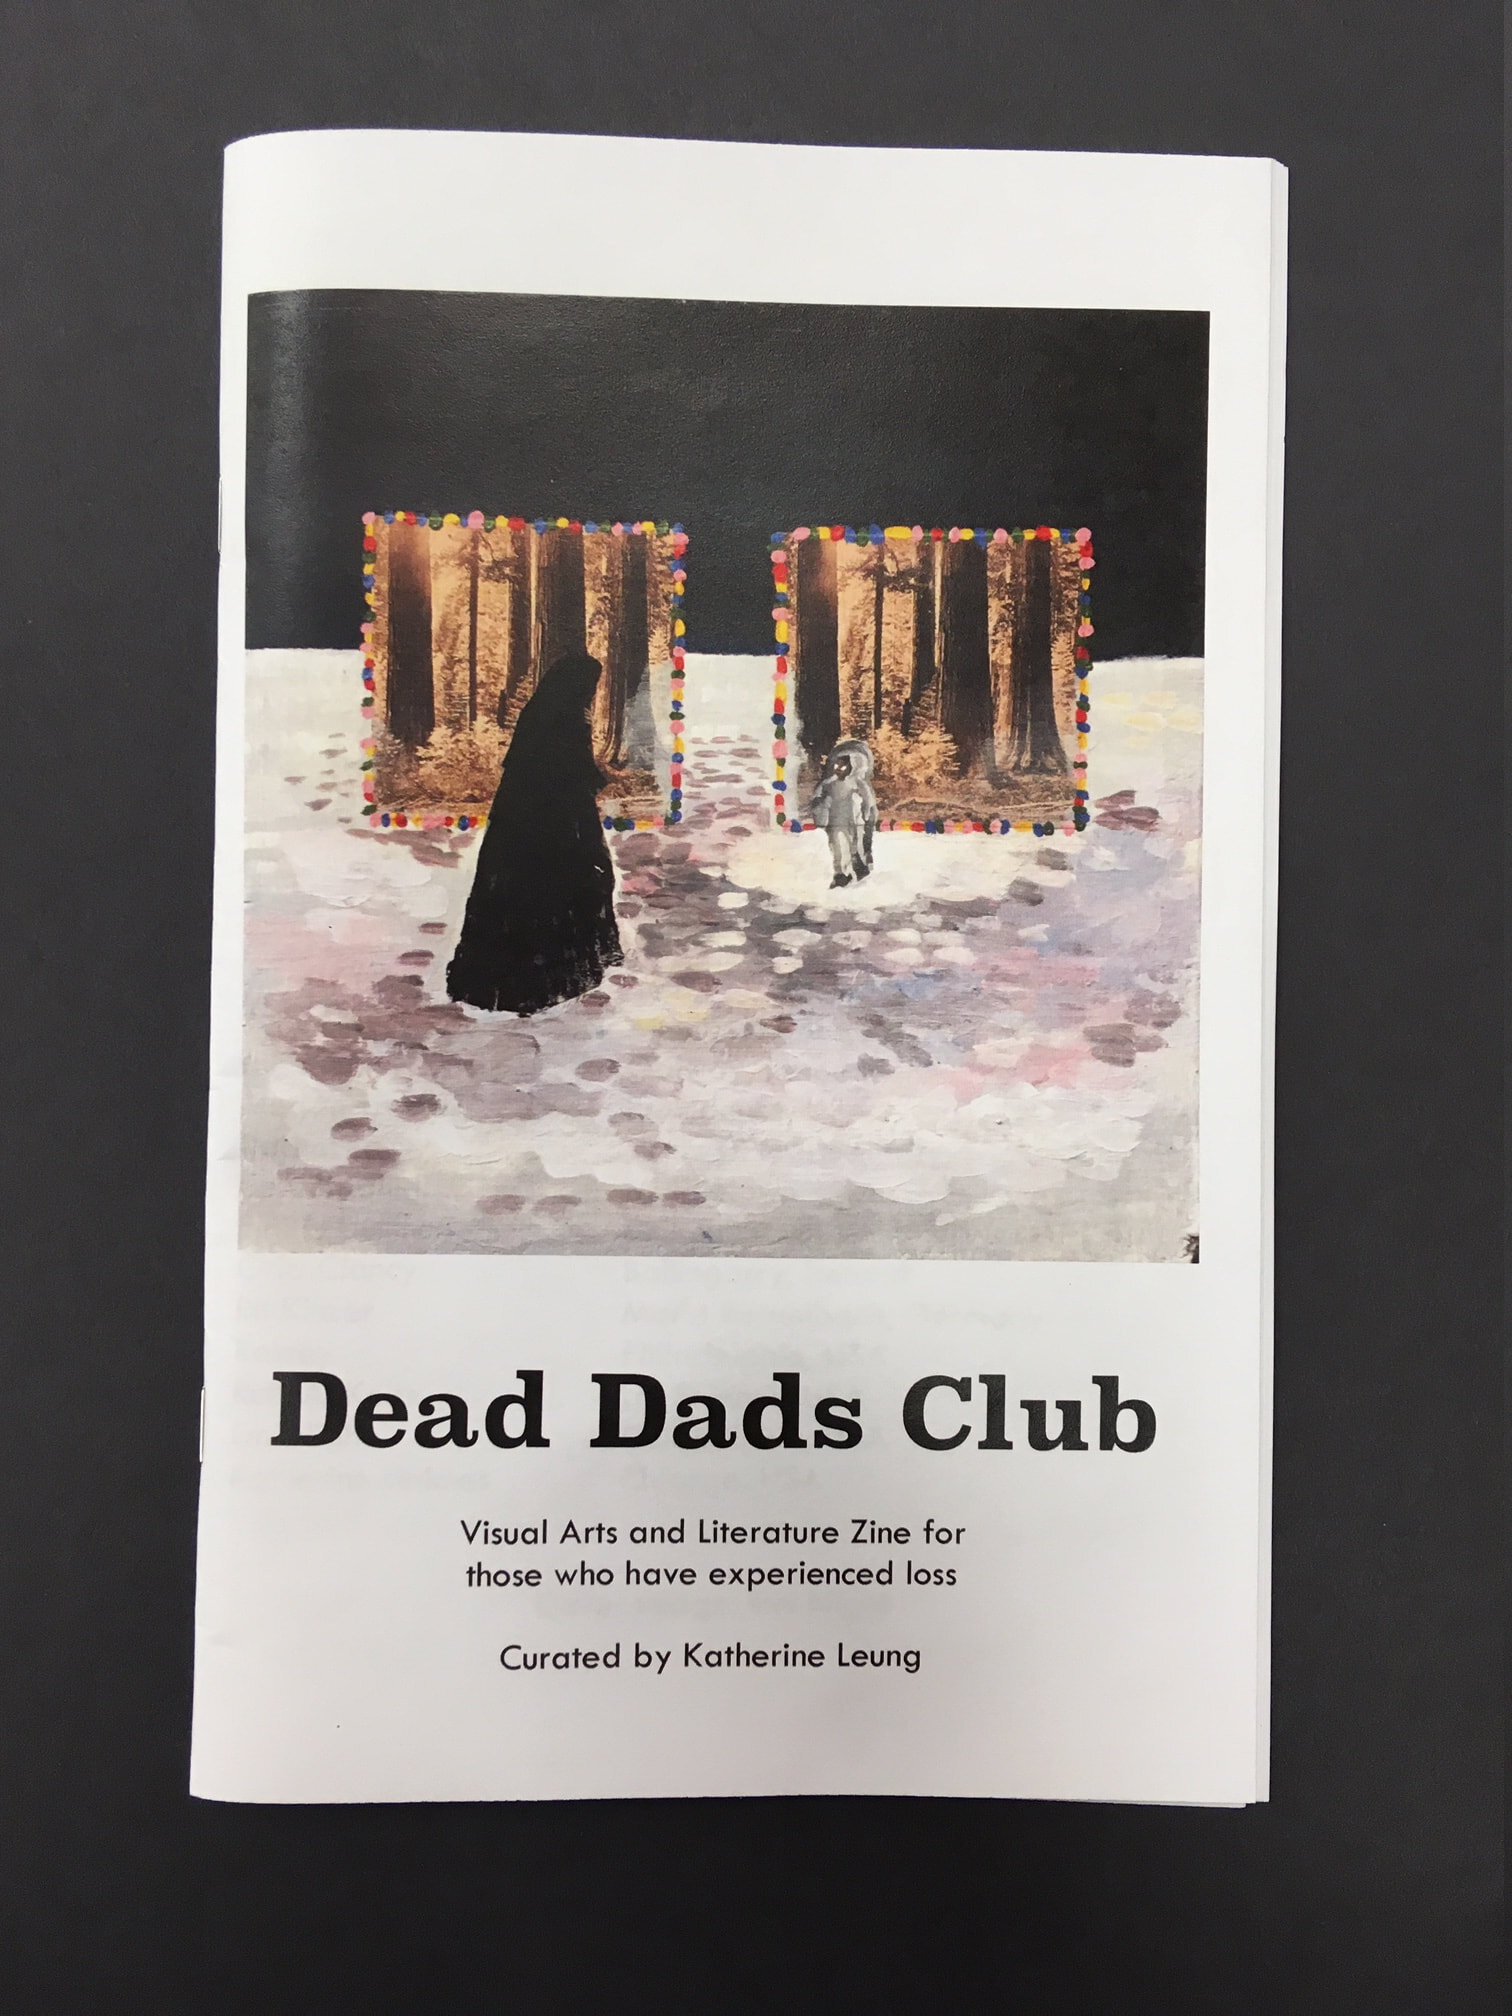 Dead Dads Club by Katherine Leung